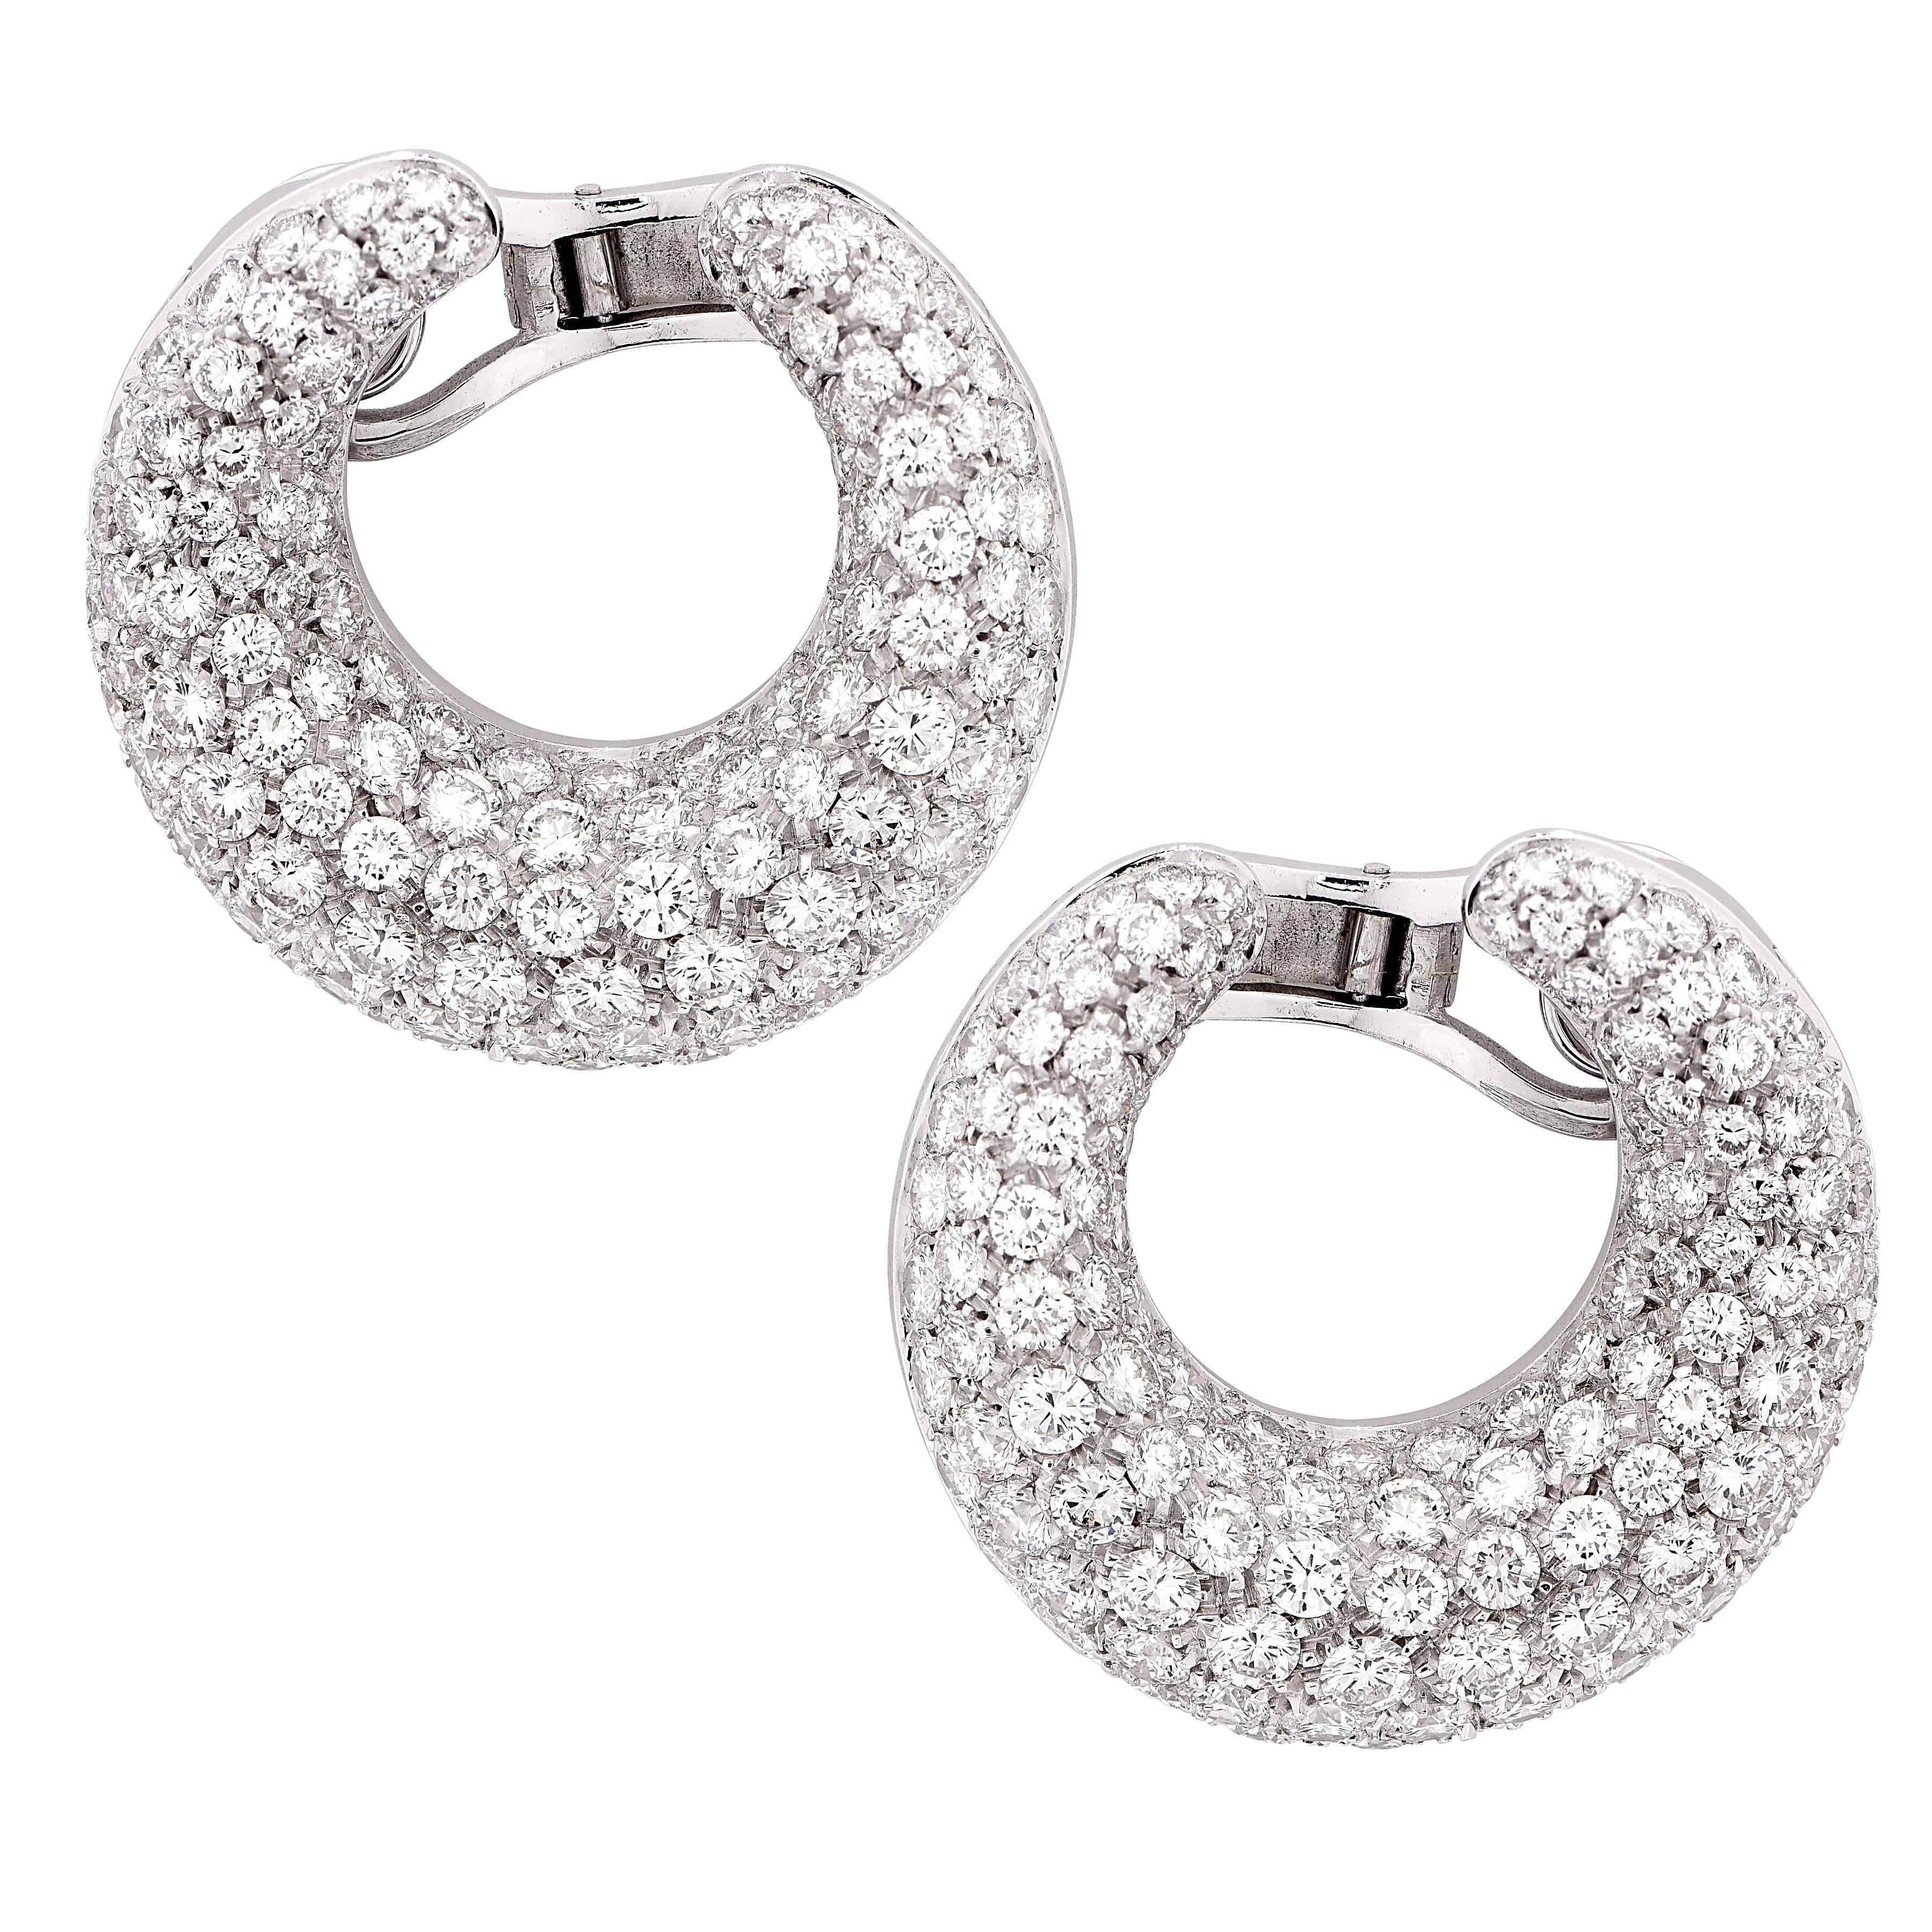 13.5 Carat Total Weight Diamond Bombe Crescent Form Clip Earrings For Sale